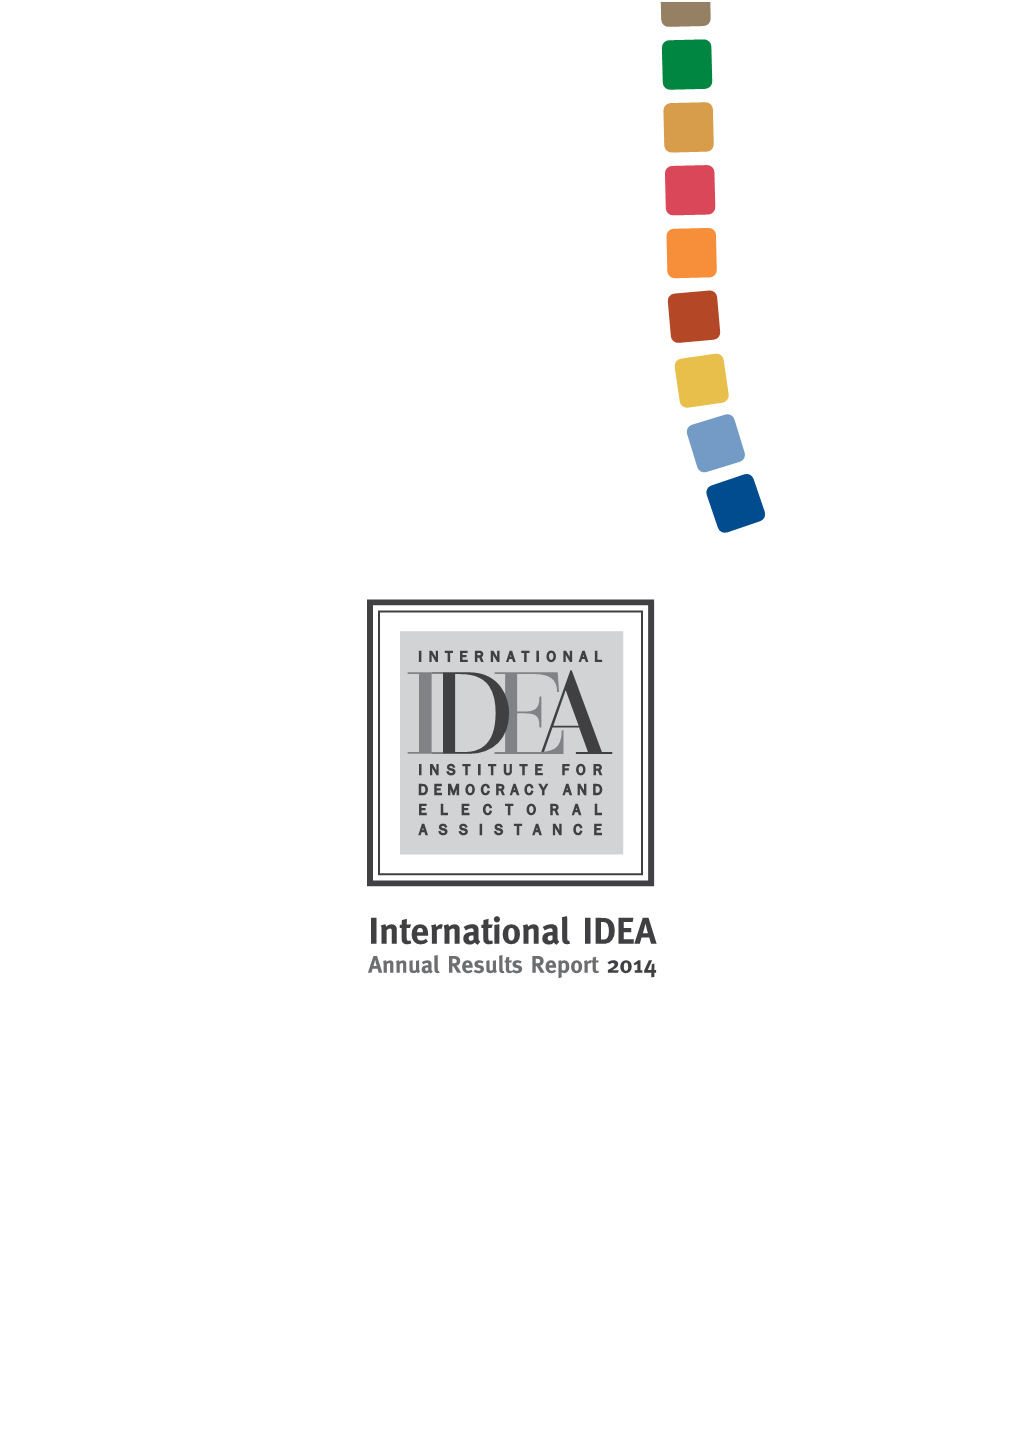 International IDEA Annual Results Report 2014 About This Report